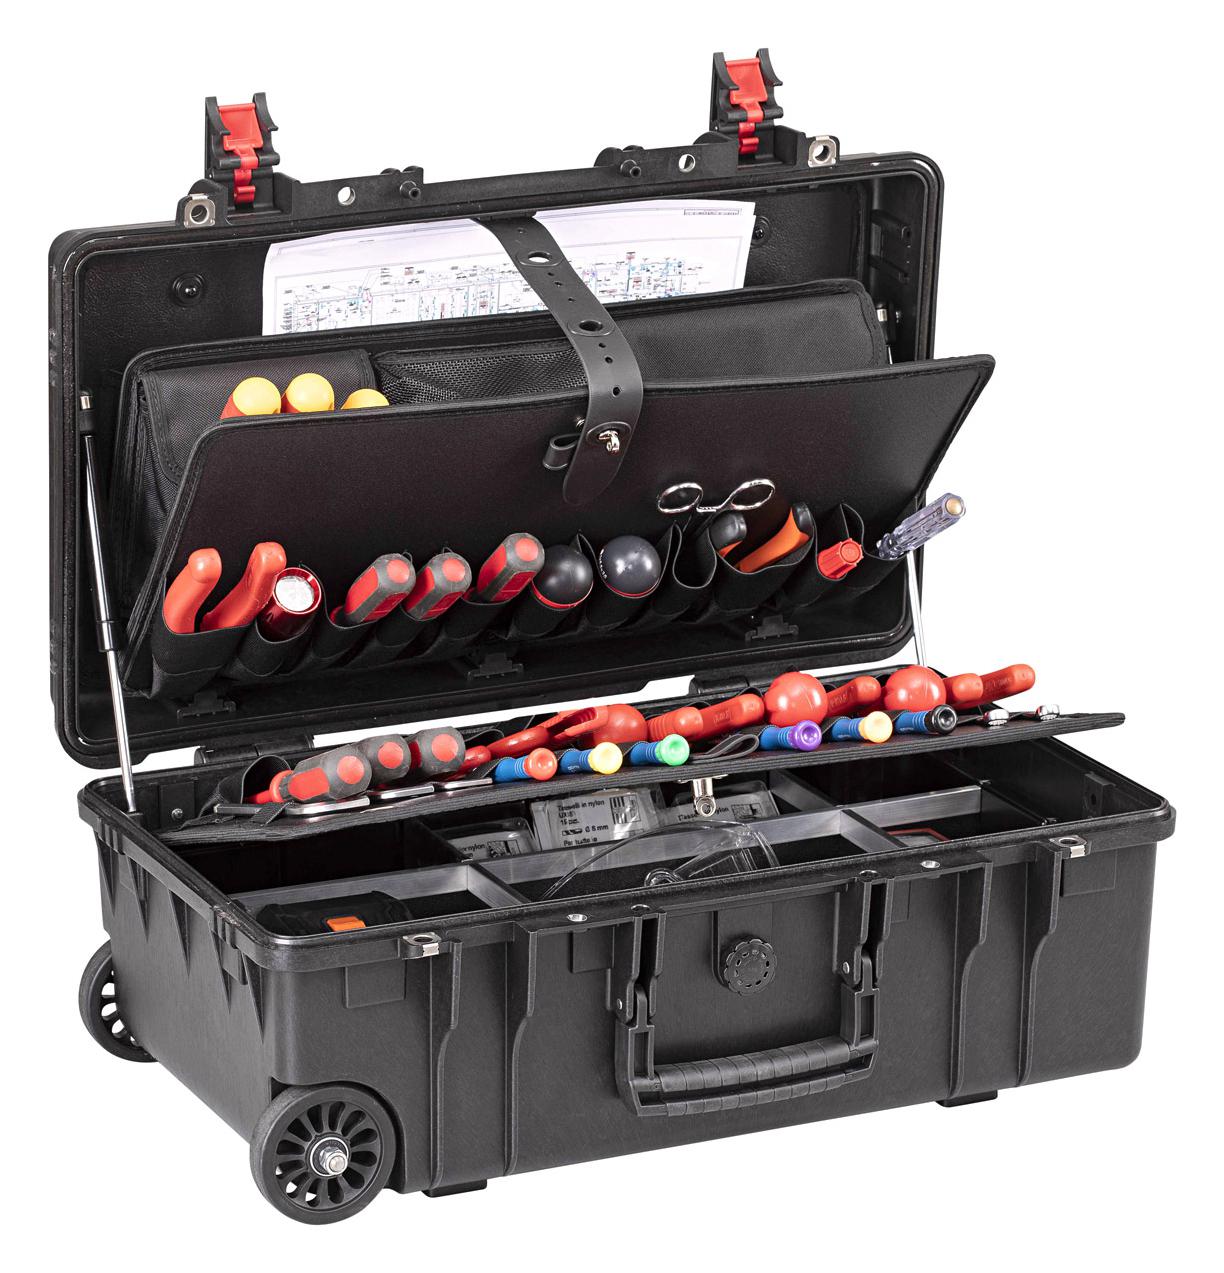 GtGt LineGt 52-21 Pts Tool Case, Pp, 520 X 285 X 205mm, Ip67